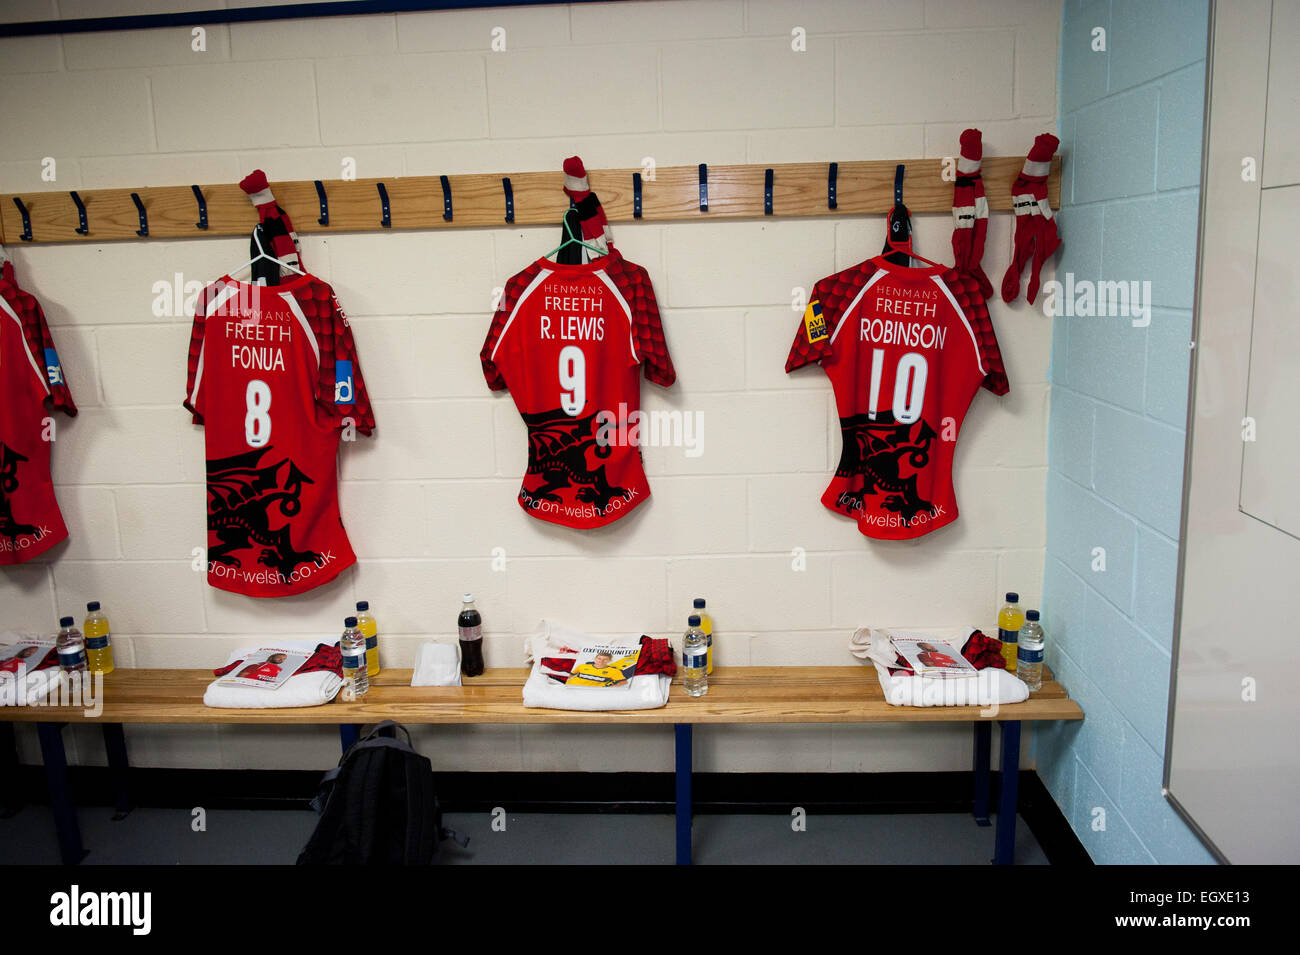 Shirts of London Welsh rugby in the dressing room before a match Stock Photo